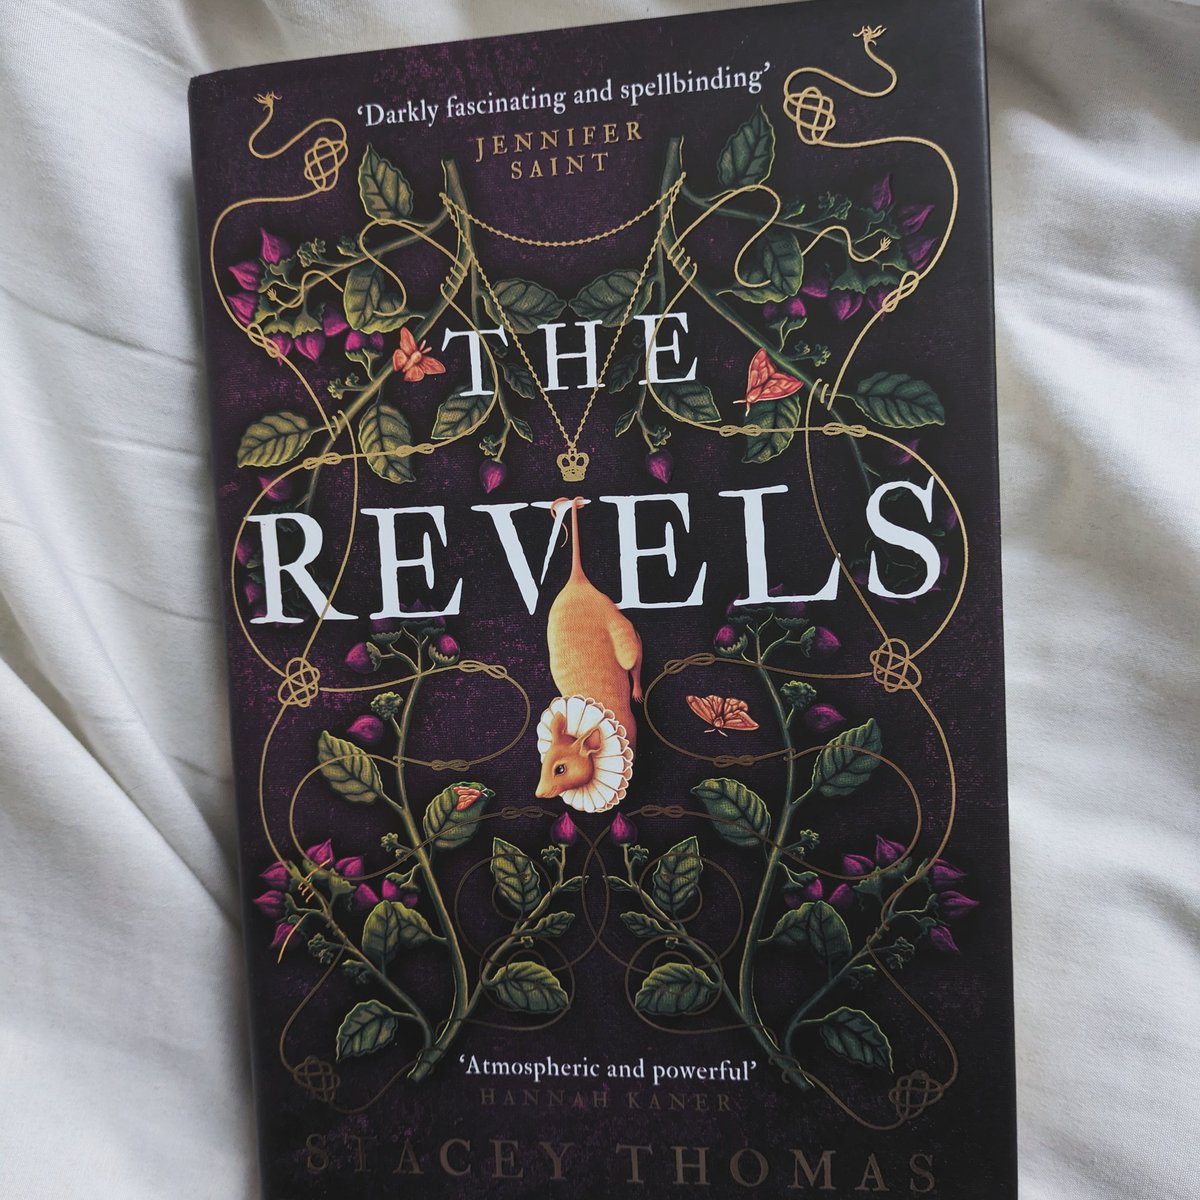 Look at this gorgeous cover #BookTwitter I loved this slow burning tense and atmospheric novel set in 17th century England by @Staceyv_Thomas which captures the unease and uncertainty of the time